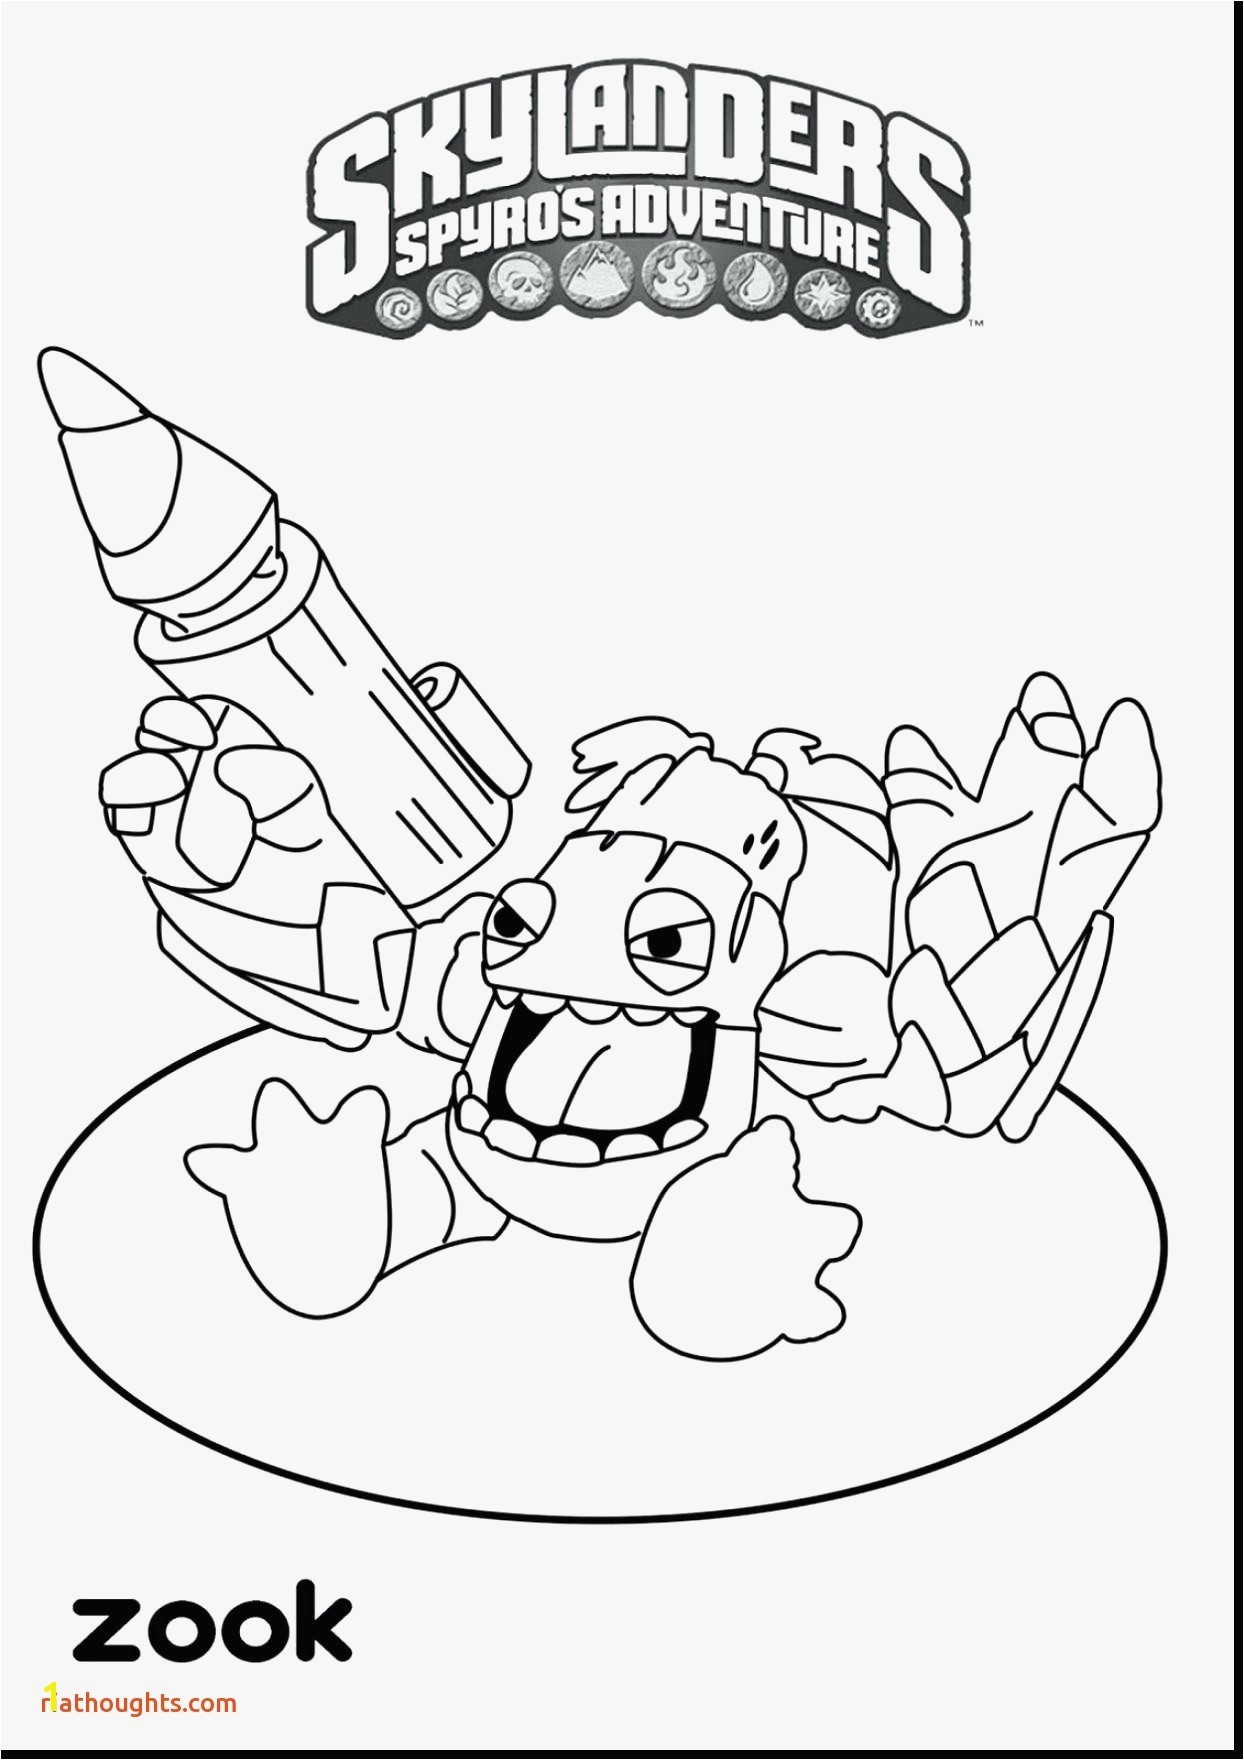 Birthday themed Coloring Pages 12 Fresh Weird Coloring Pages